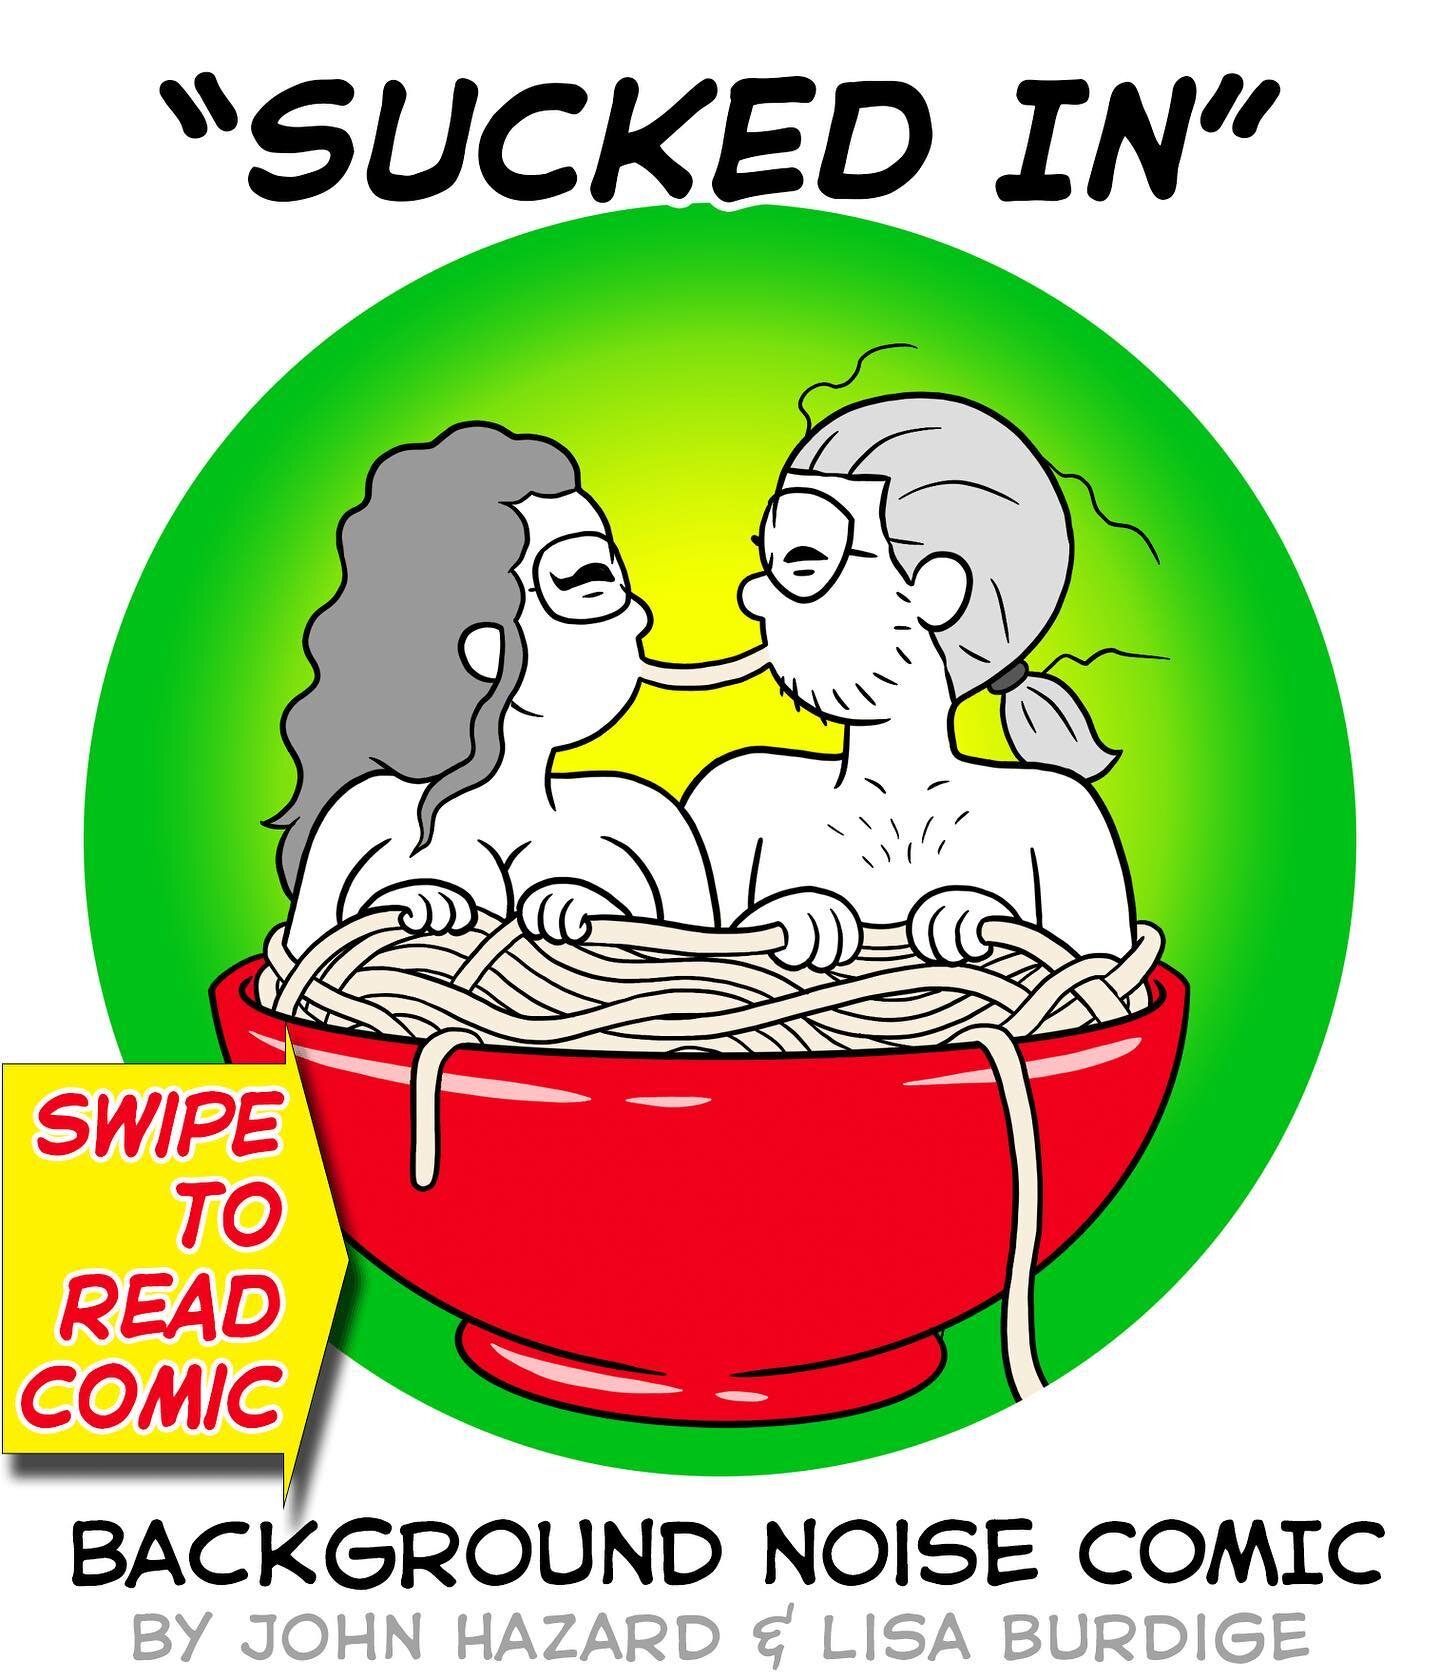 🍝 &ldquo;Sucked In&rdquo;
What&rsquo;s your recipe for spicing things up?😋
Diary Comic by @lisaburd &amp; @frankensteinsuperstar 
Follow Background Noise Comic on Webtoons, tip us on #KoFi, &amp; get masks and other swag in our shop, and iPhone STI